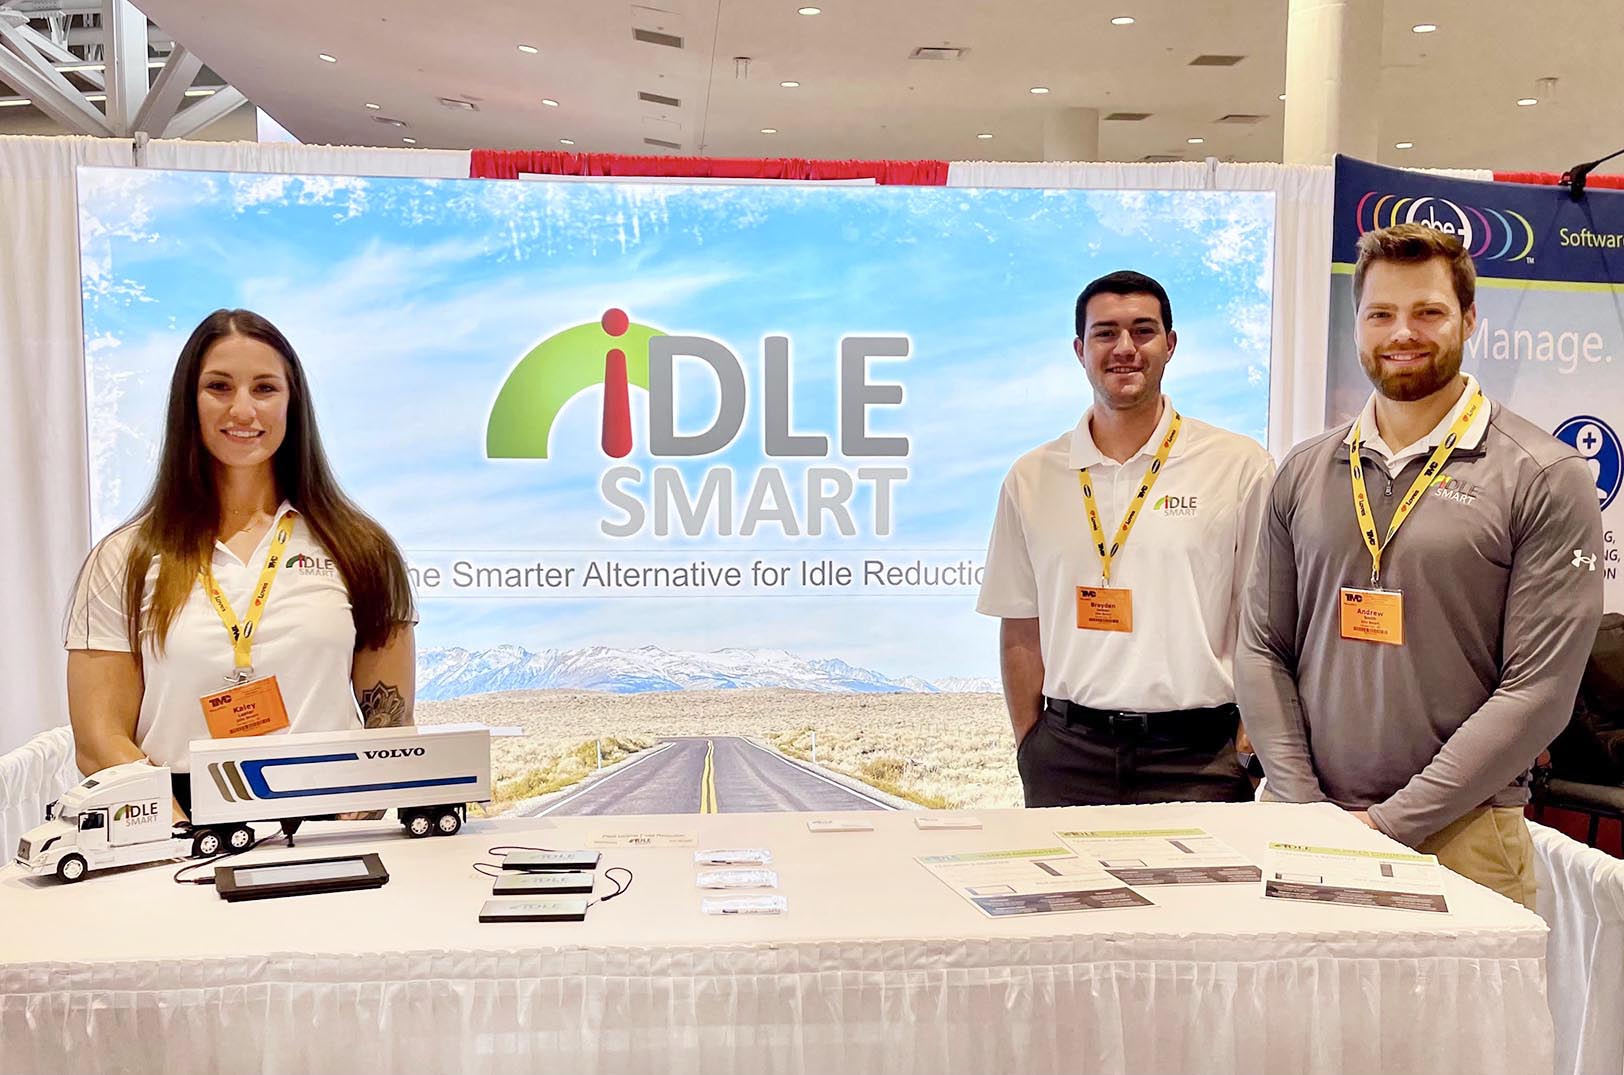 How a KC partnership helped Idle Smart avoid a cold start that could’ve stalled its recovery